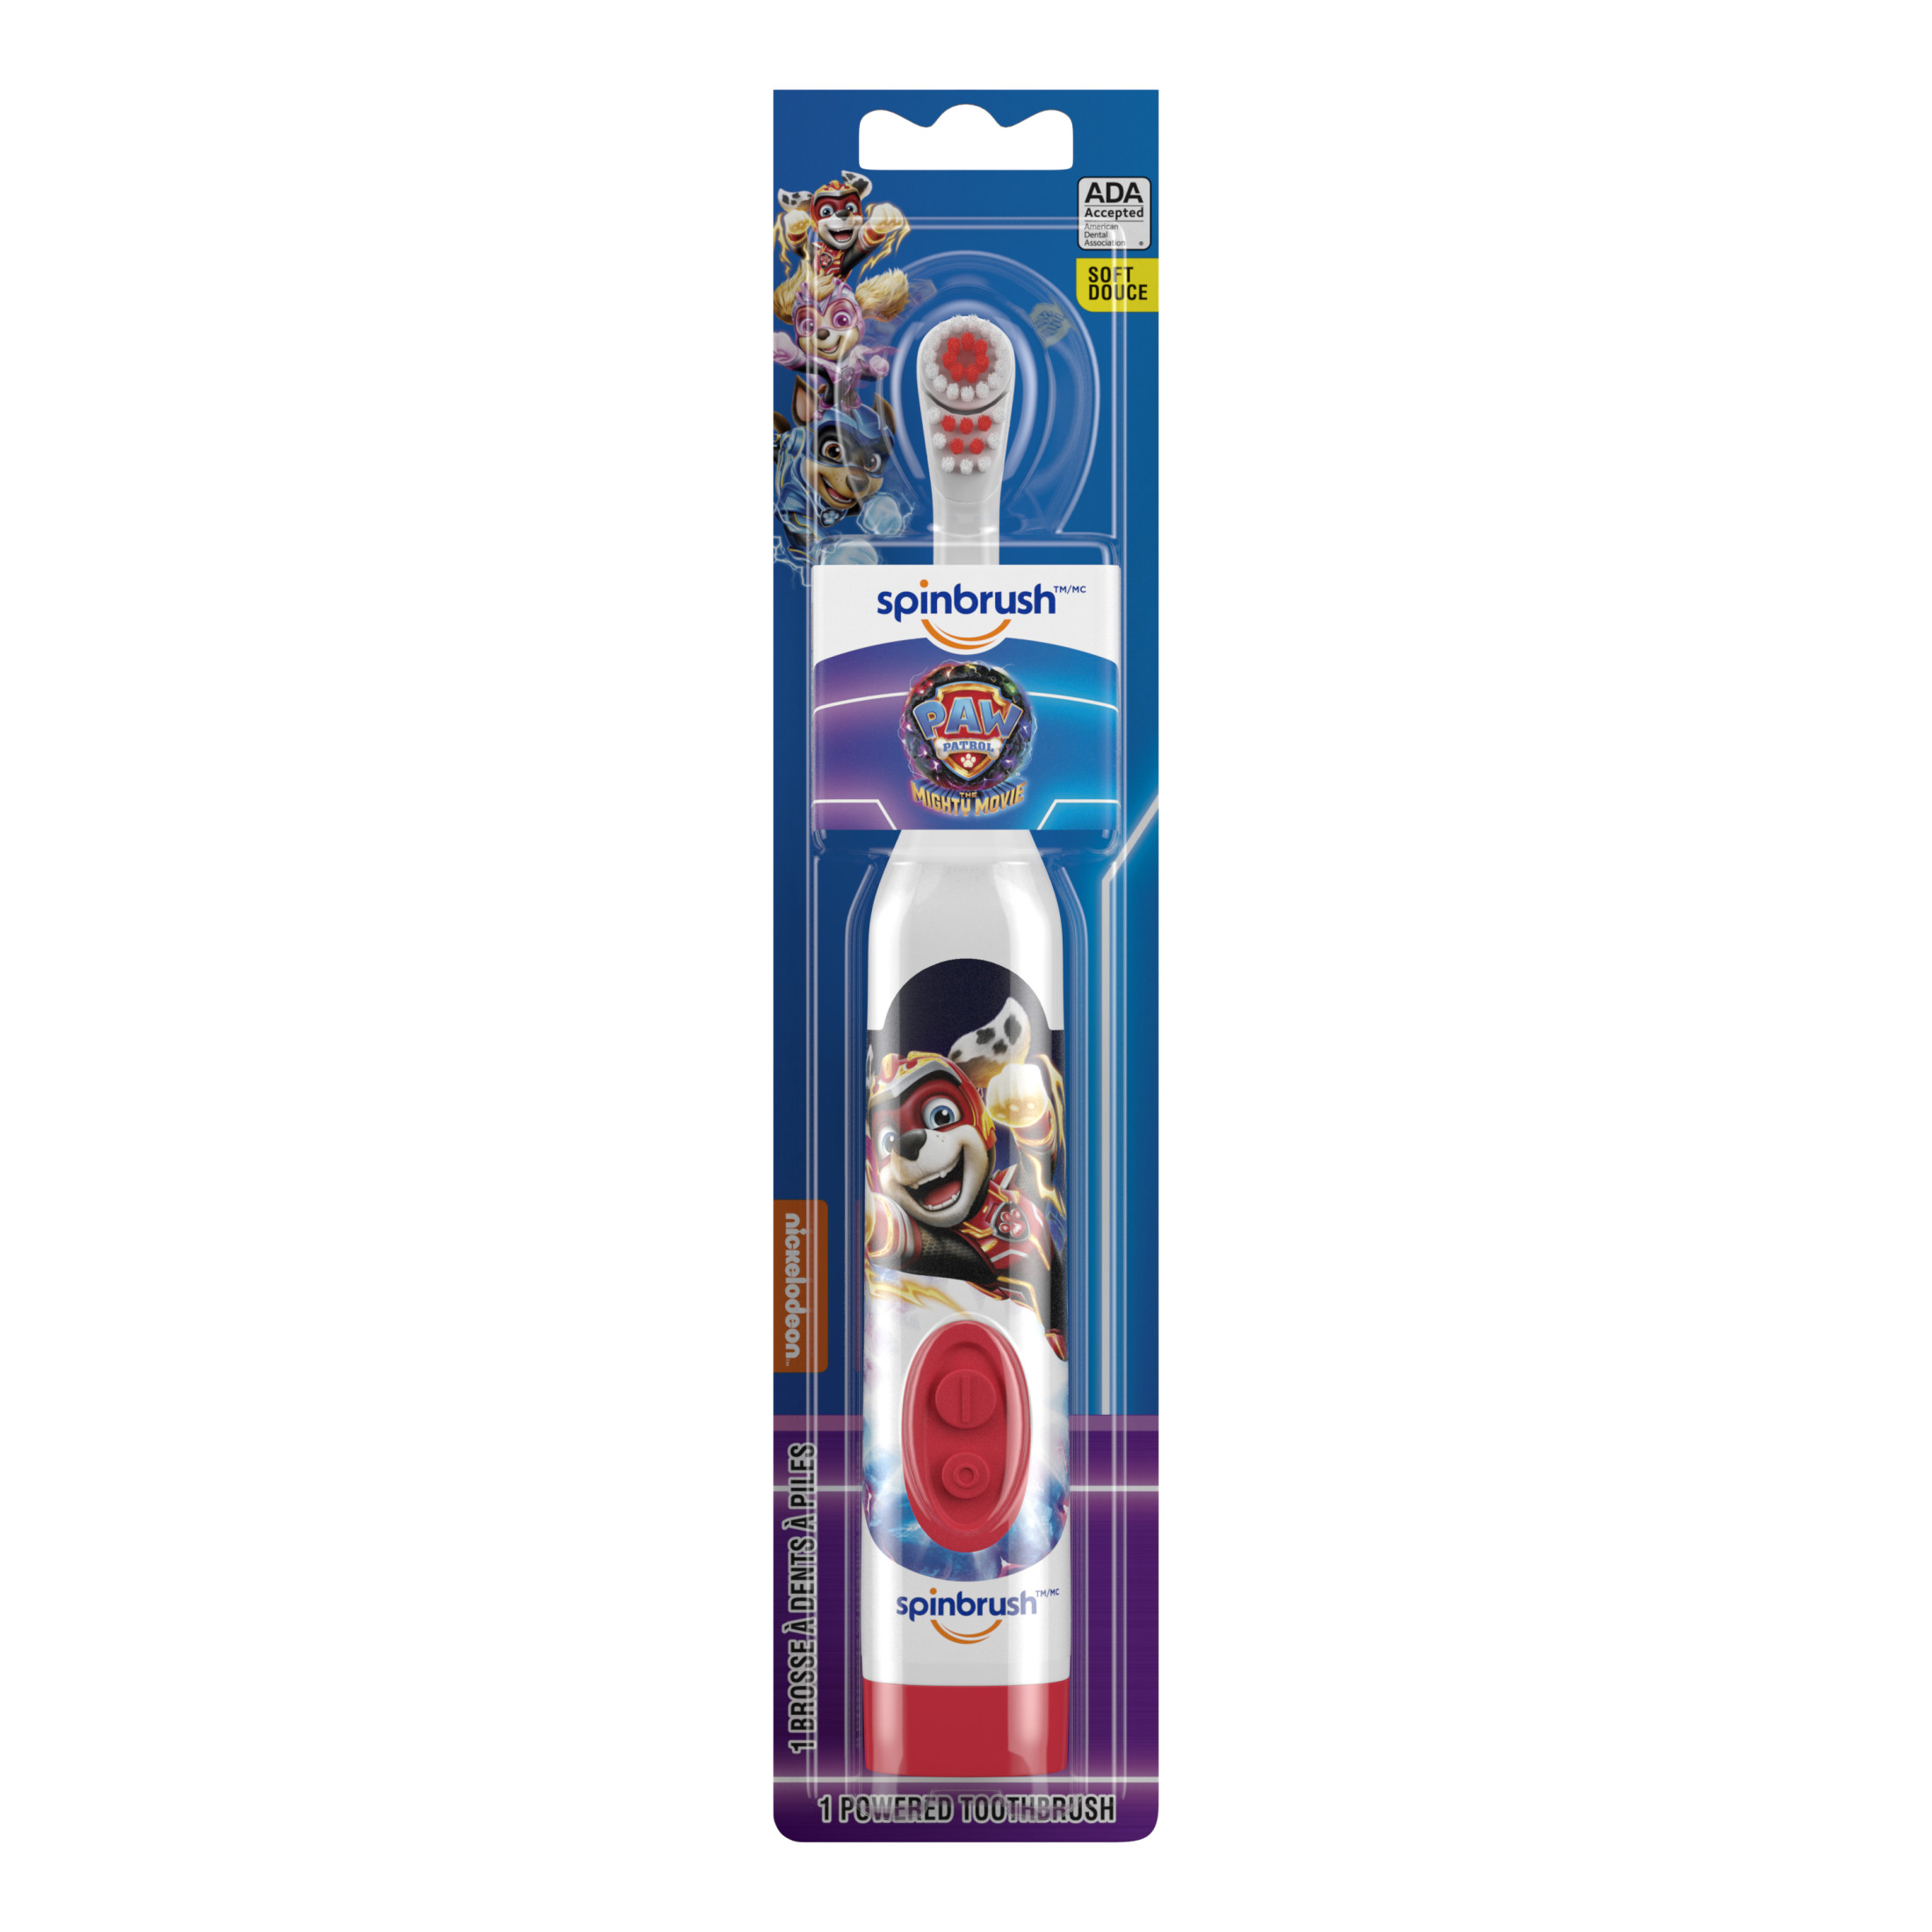 PAW Patrol Spinbrush Kids Battery-Powered Toothbrush, Soft Bristles, Ages 3+, Character May Vary - image 5 of 8